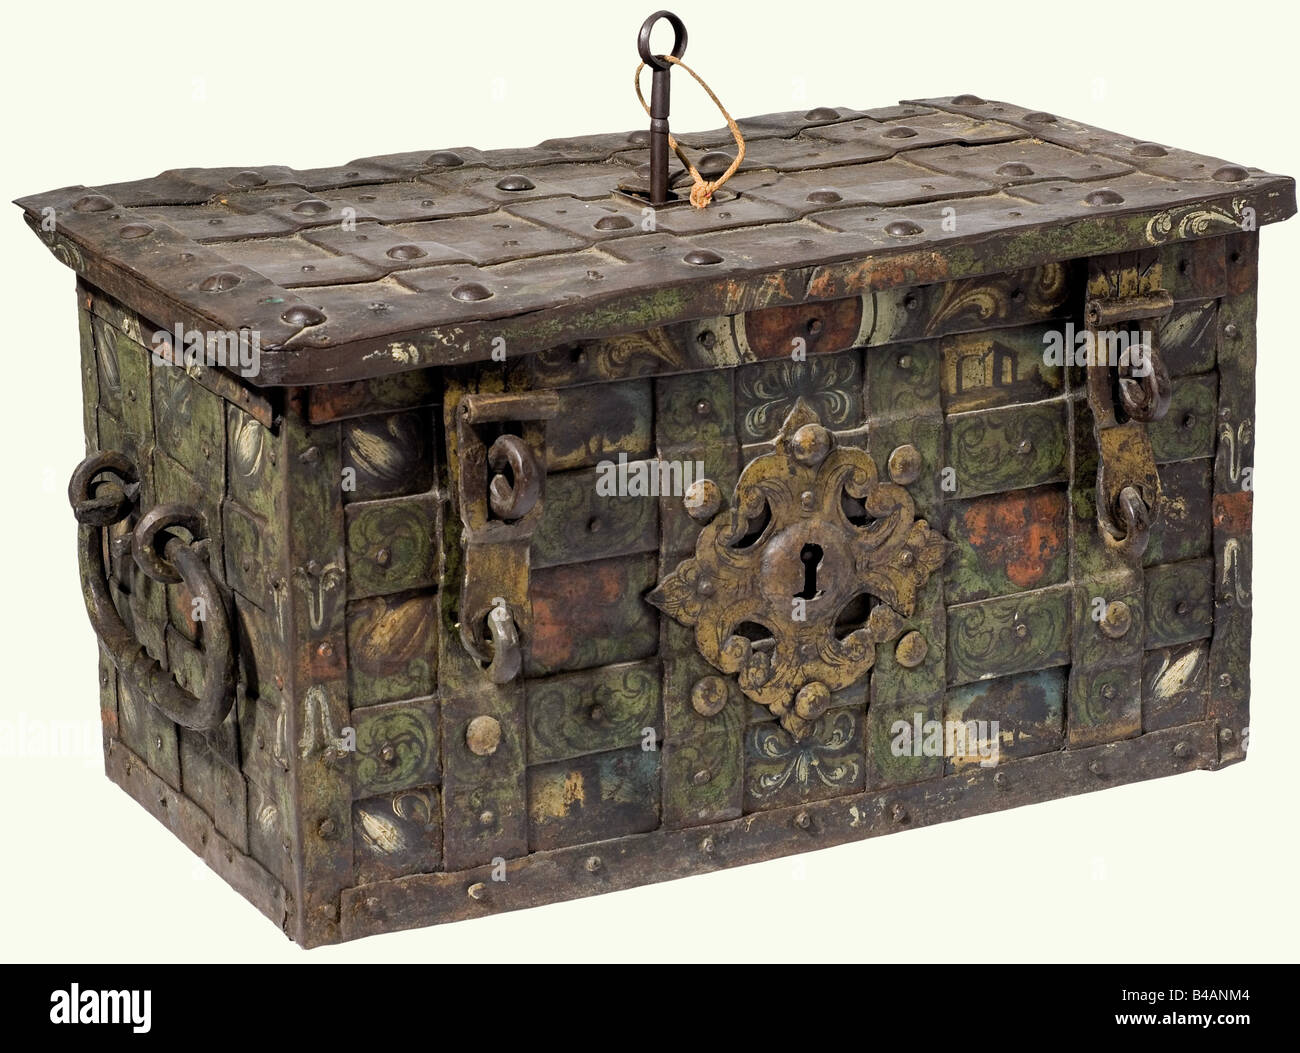 A strongbox painted in colour, German, 2nd half of the 17th century. Rectangular trunk with crossed and riveted strap reinforcements. Lid with central keyhole, movable cover. False lock on the front with openwork and embossed escutcheon, two hasps. Two movable carrying handles on the sides. Original colour painting on front and sides with small landscape vistas amid vines and scrollwork. There is a lock mechanism with six tumblers in the lid, lock cover with rich openwork and engraved decoration showing two Nereids. Iron key with hollow shank. Dimensions 37 x 7, Stock Photo